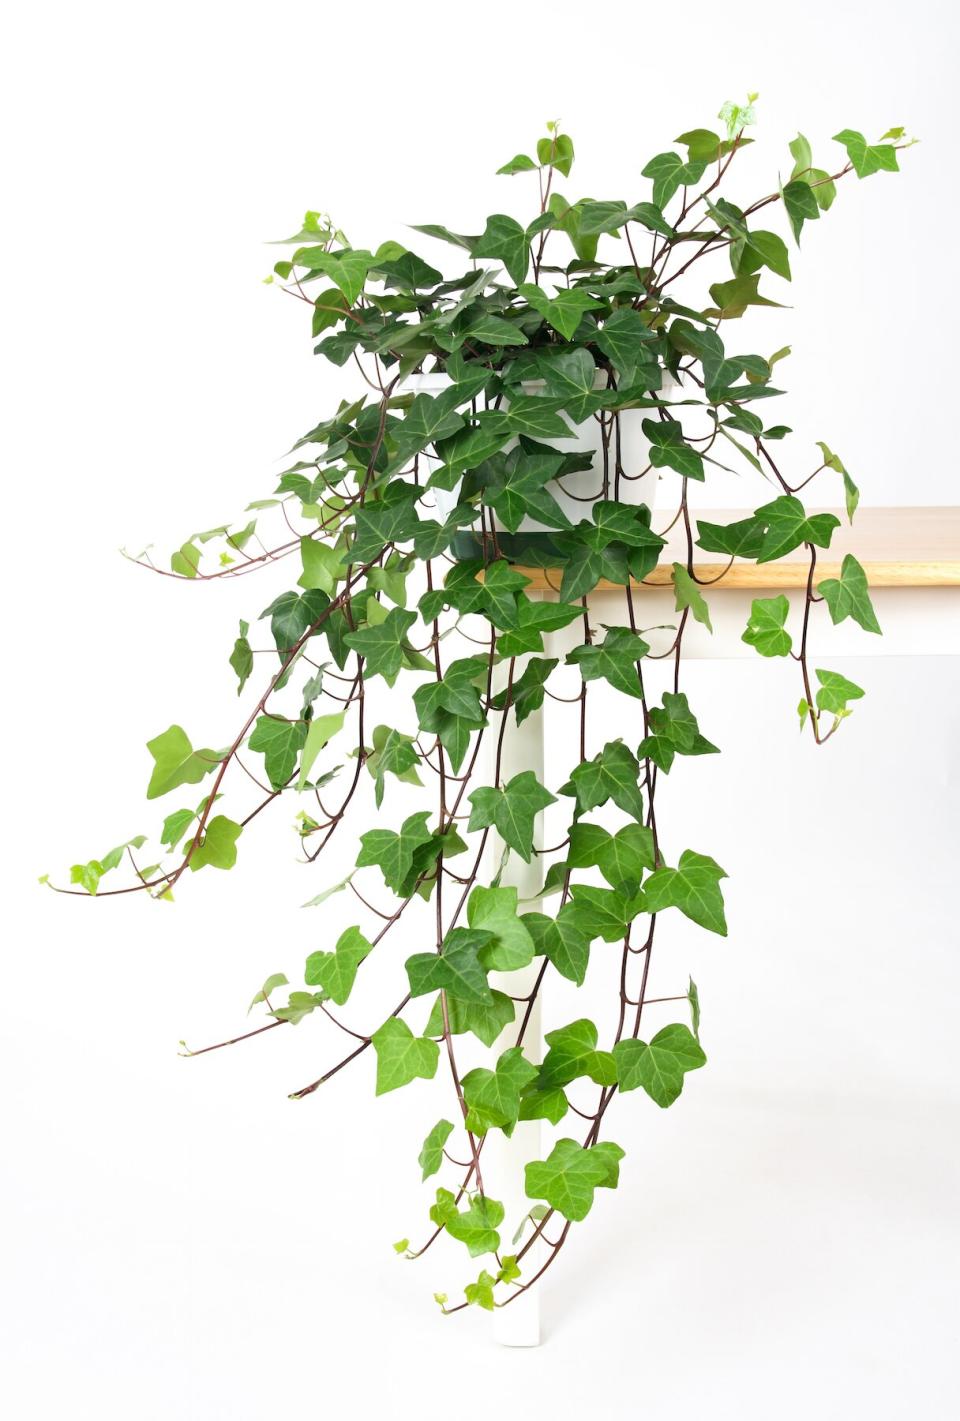 Plants That Don't Need Sunlight, Ivy